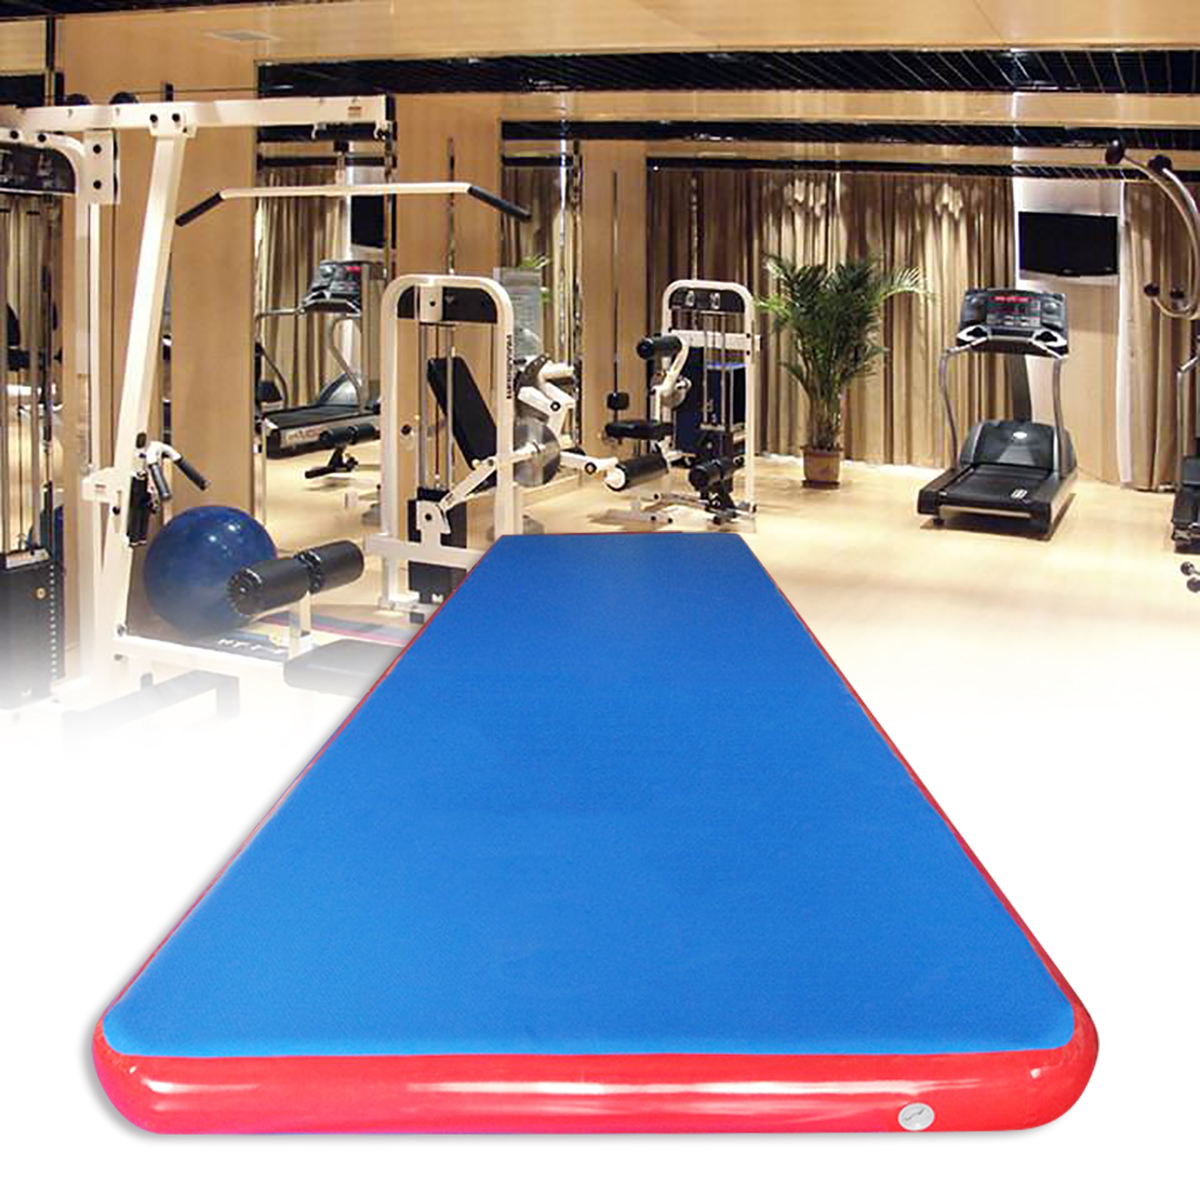 275x79x4inch Inflatable Tumbling Mat Air Track Outdoor Home Gymnastics Training Sport Protection Pad